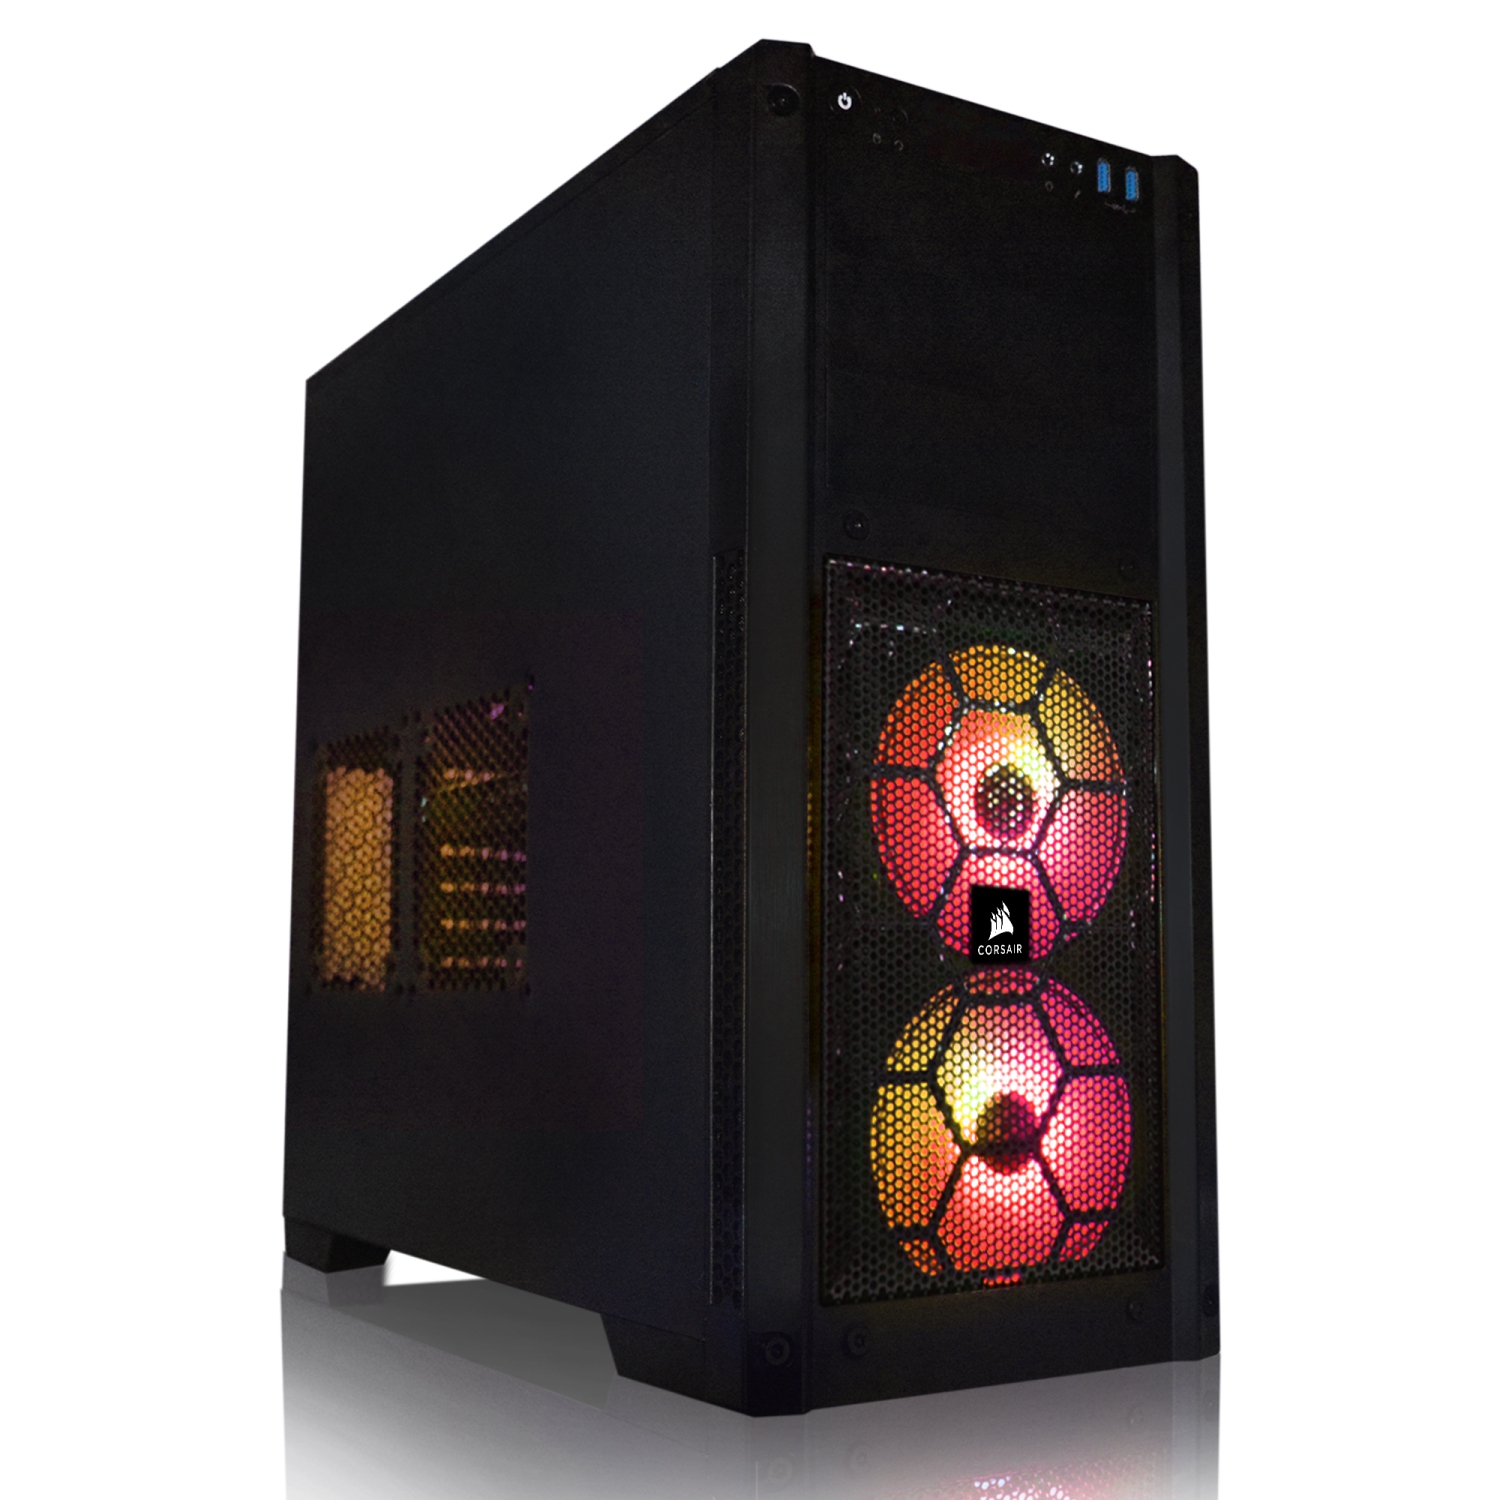 Refurbished (Good) - Gaming PC AMD 8-Core FX upto 4.2GHz Processor 16GB RAM 1TB SSD Radeon RX550 DDR5 Graphics ASUS Motherboard Corsair Chassis RGB KB /Mouse Windows 10 Pro WIFI